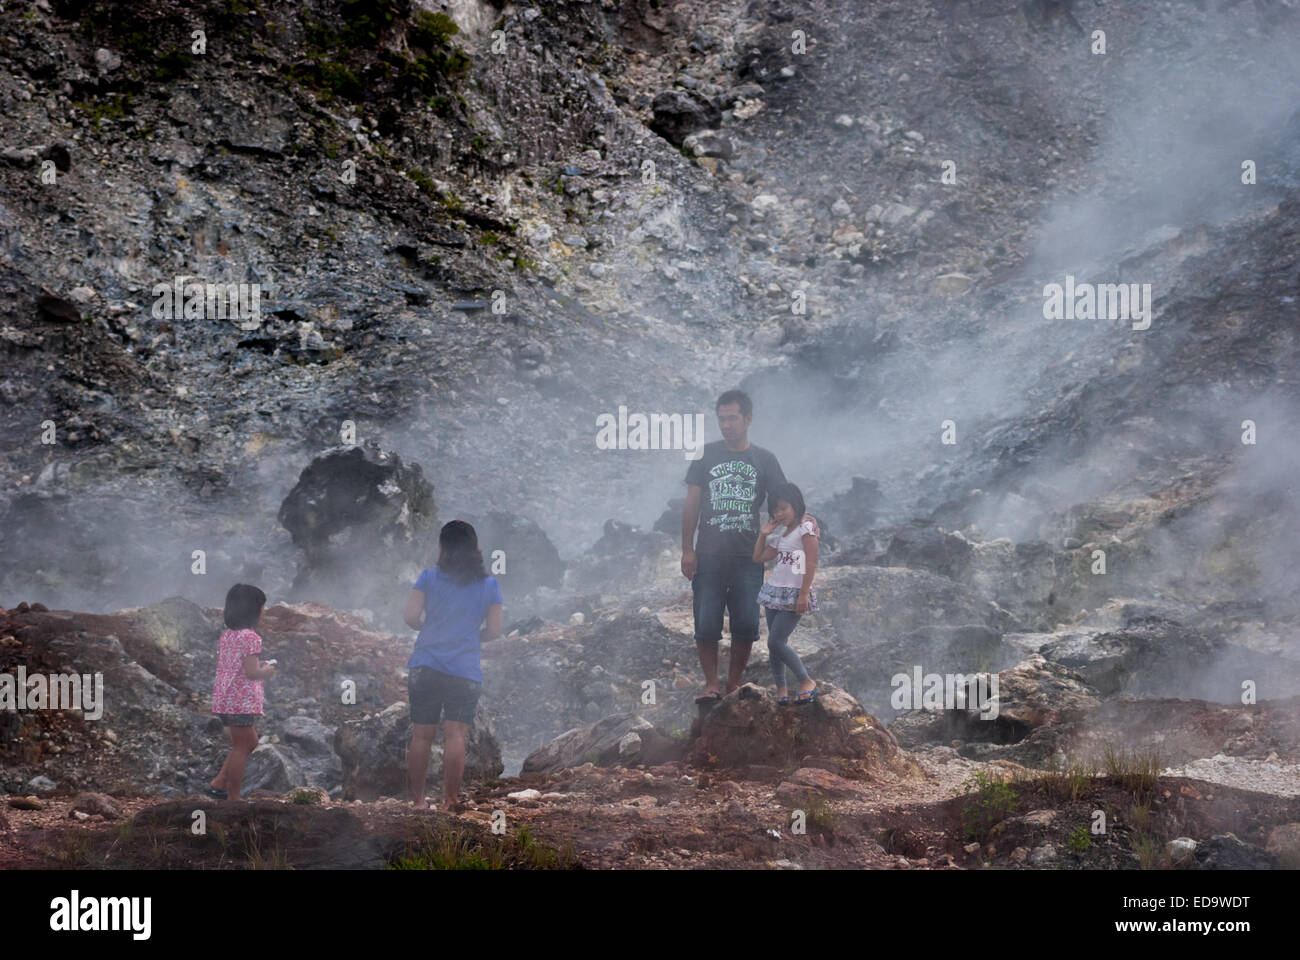 Visitors are having recreational time on fumarole field at Bukit Kasih, a popular tourist destination in Minahasa, North Sulawesi, Indonesia. Stock Photo